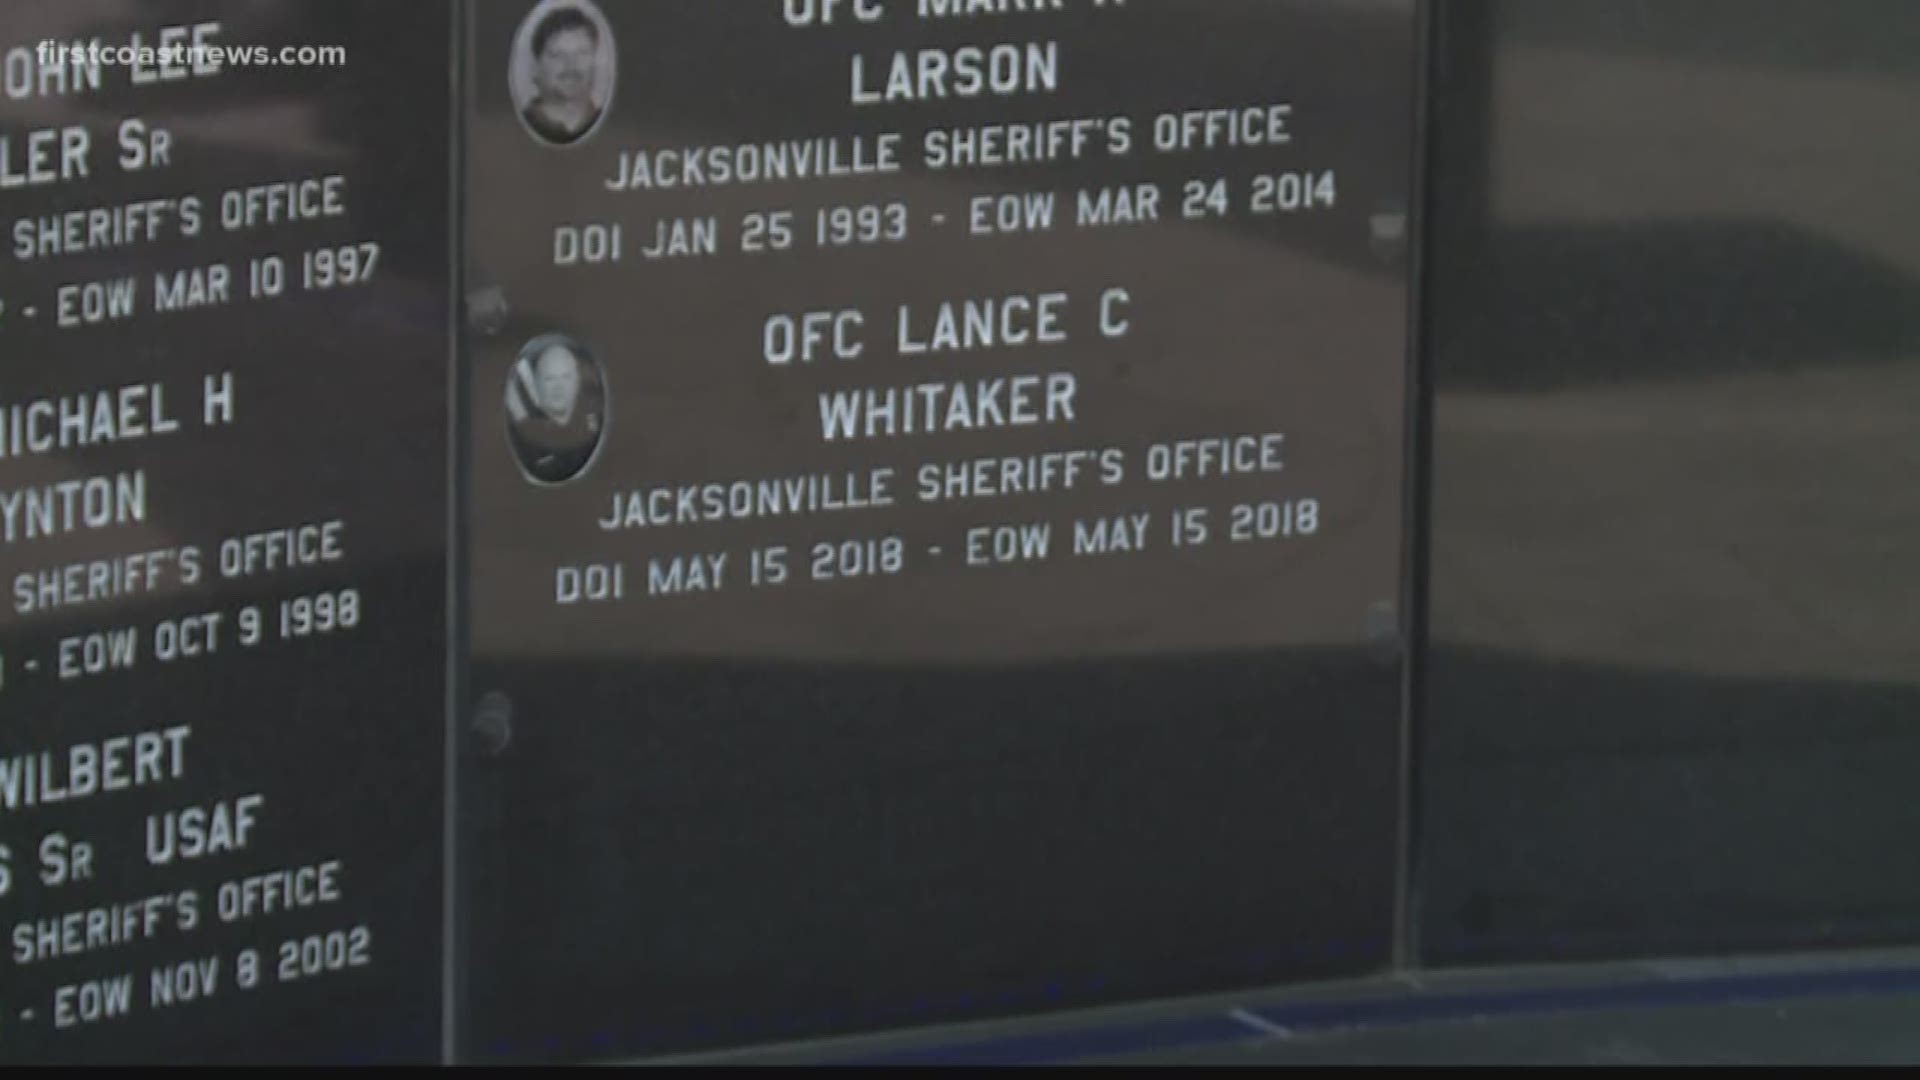 Officer Lance Whitaker's name was the latest to be added to the Police Memorial Wall at the Vystar Veterns Memorial Arena.